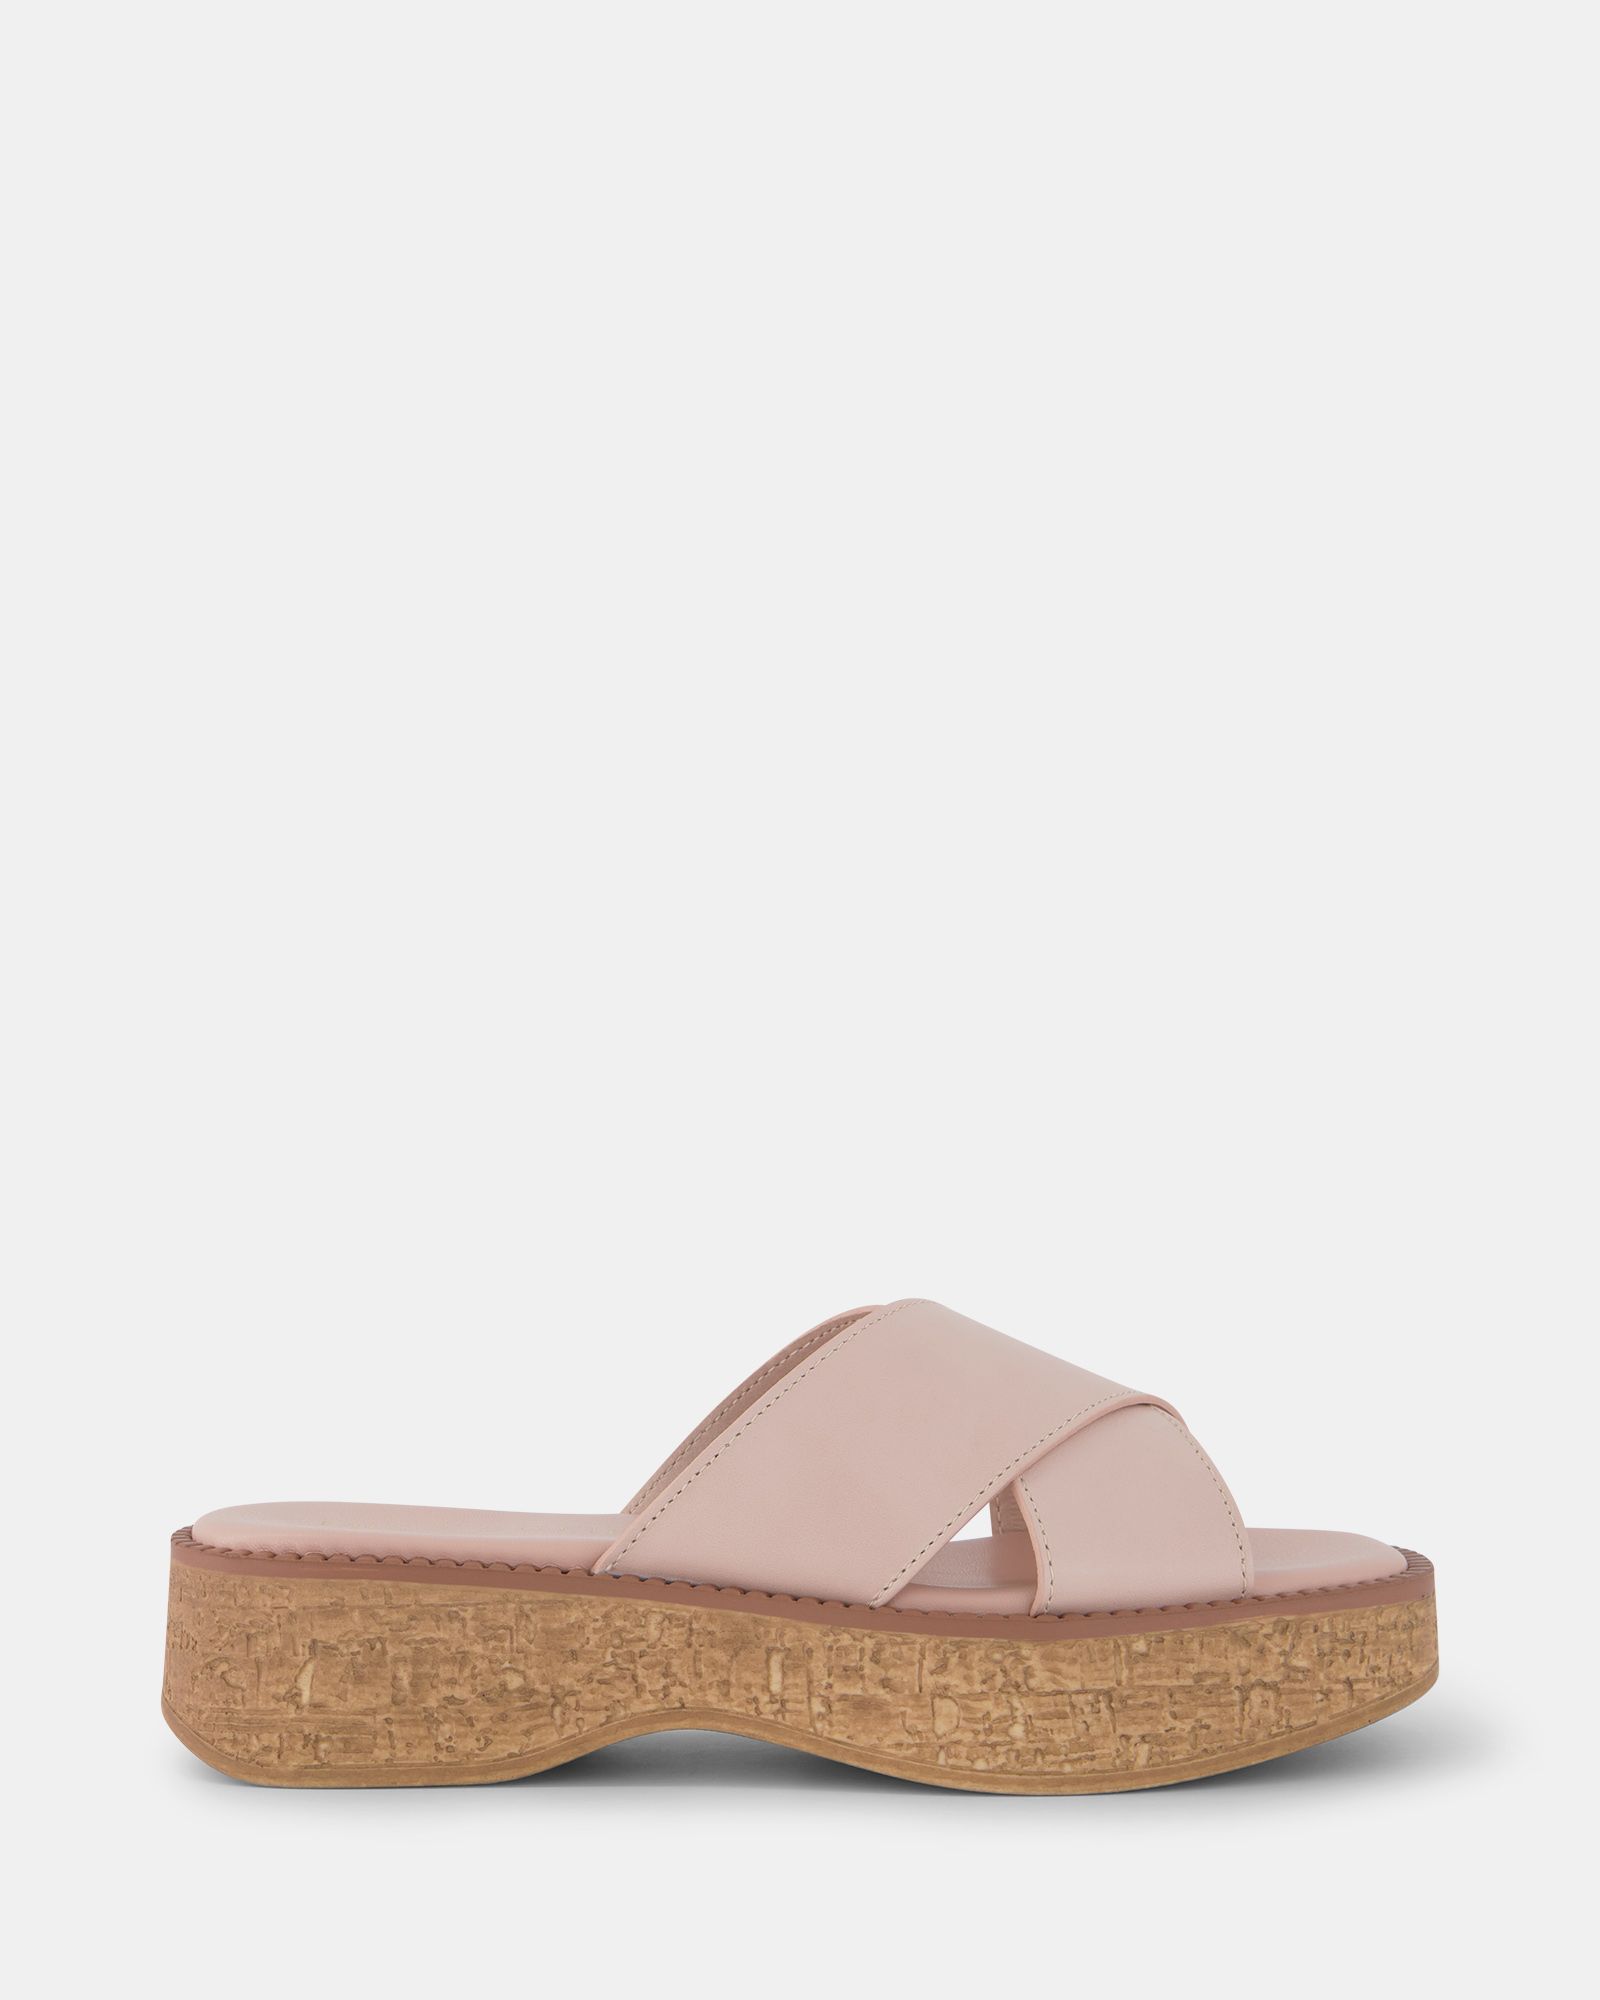 Buy KRIS Pink wedges Online at Shoe Connection